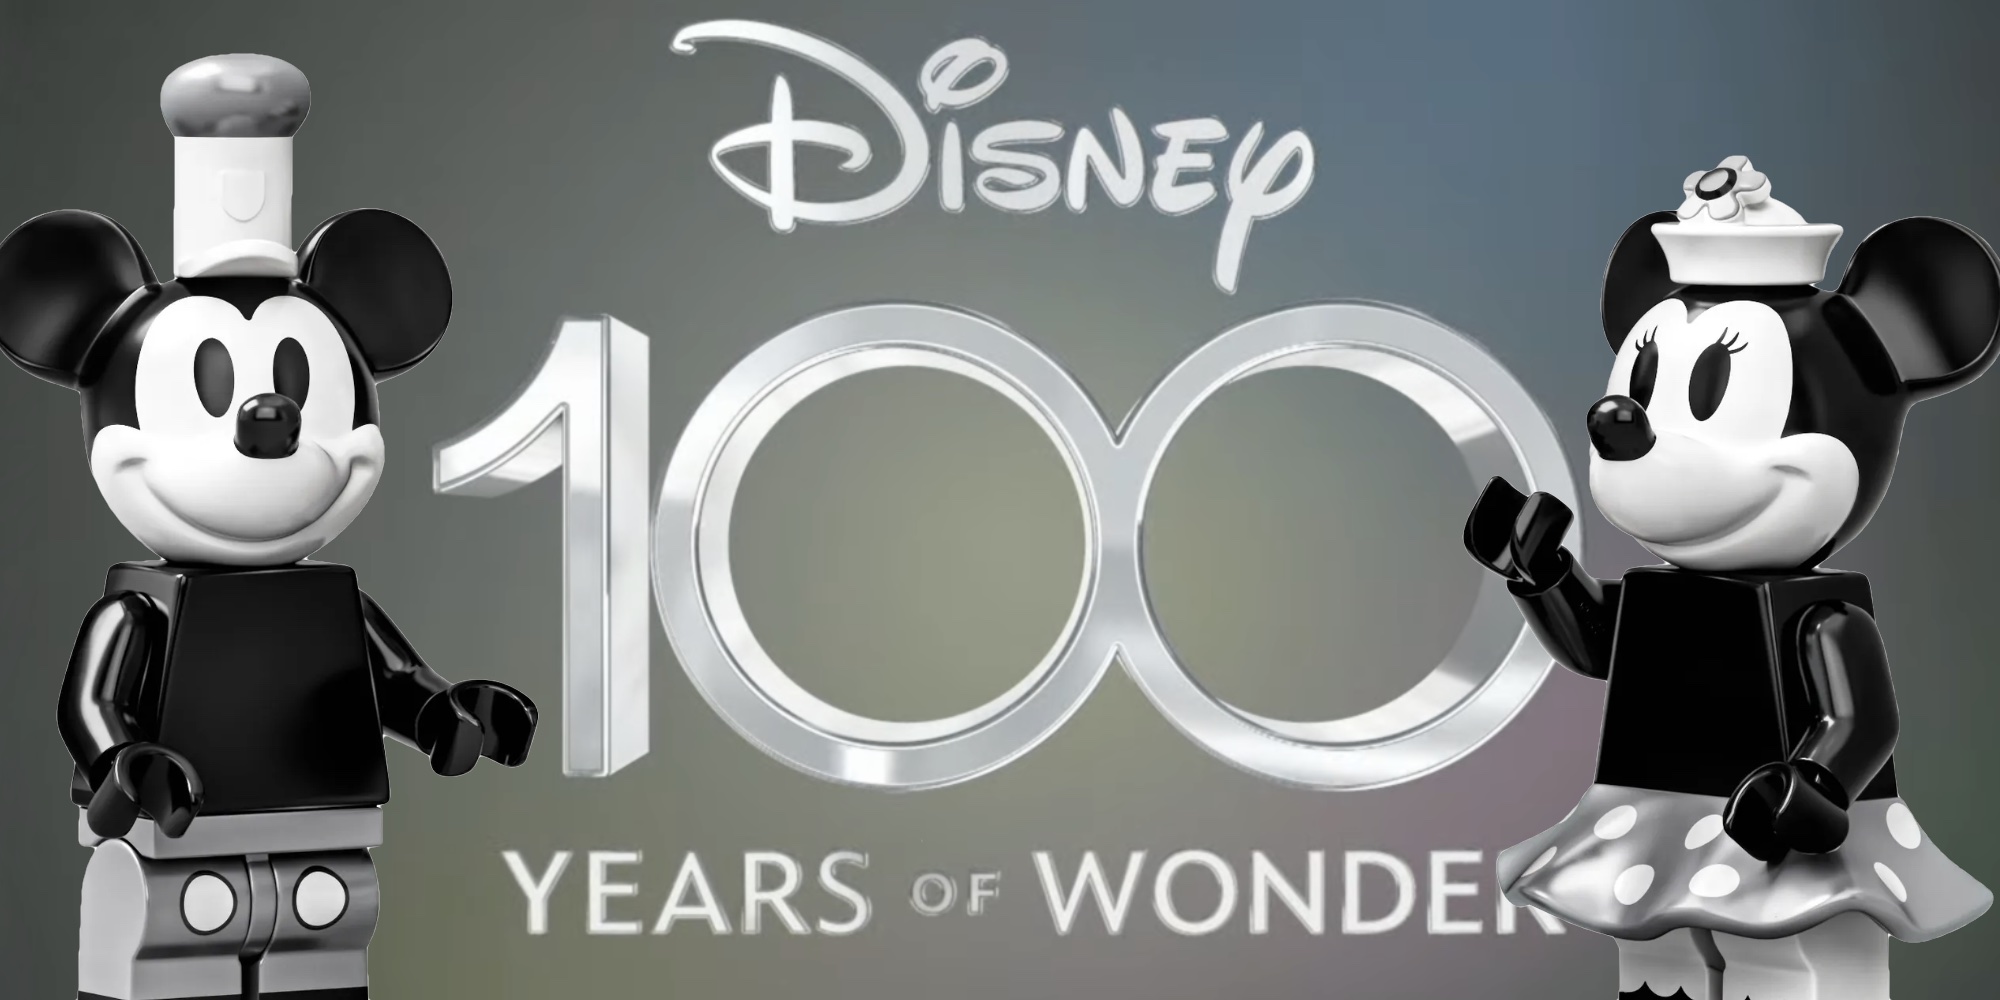 Lego Disney 100th Anniversary Collectible Minifigures On The Way